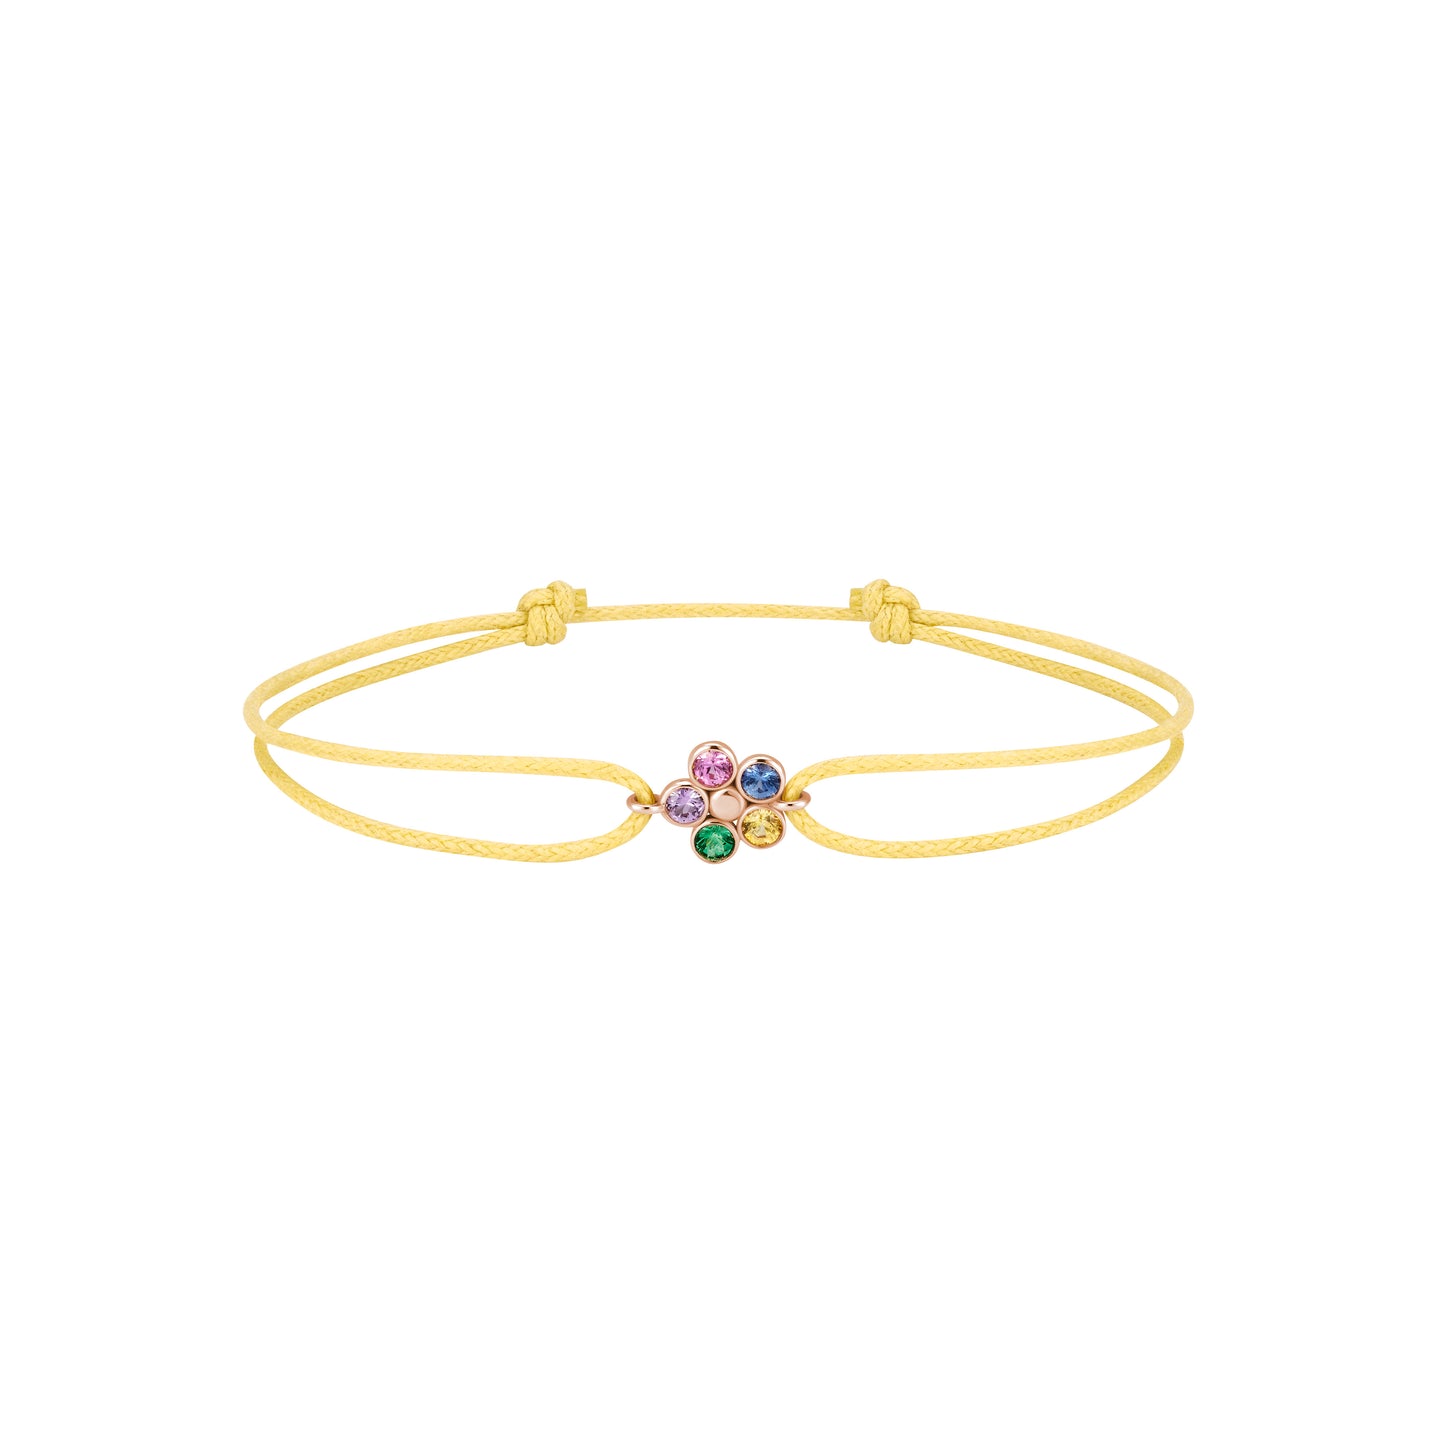 Floral cotton cord bracelet - 750/1000 pink gold motif, emerald, and sapphires